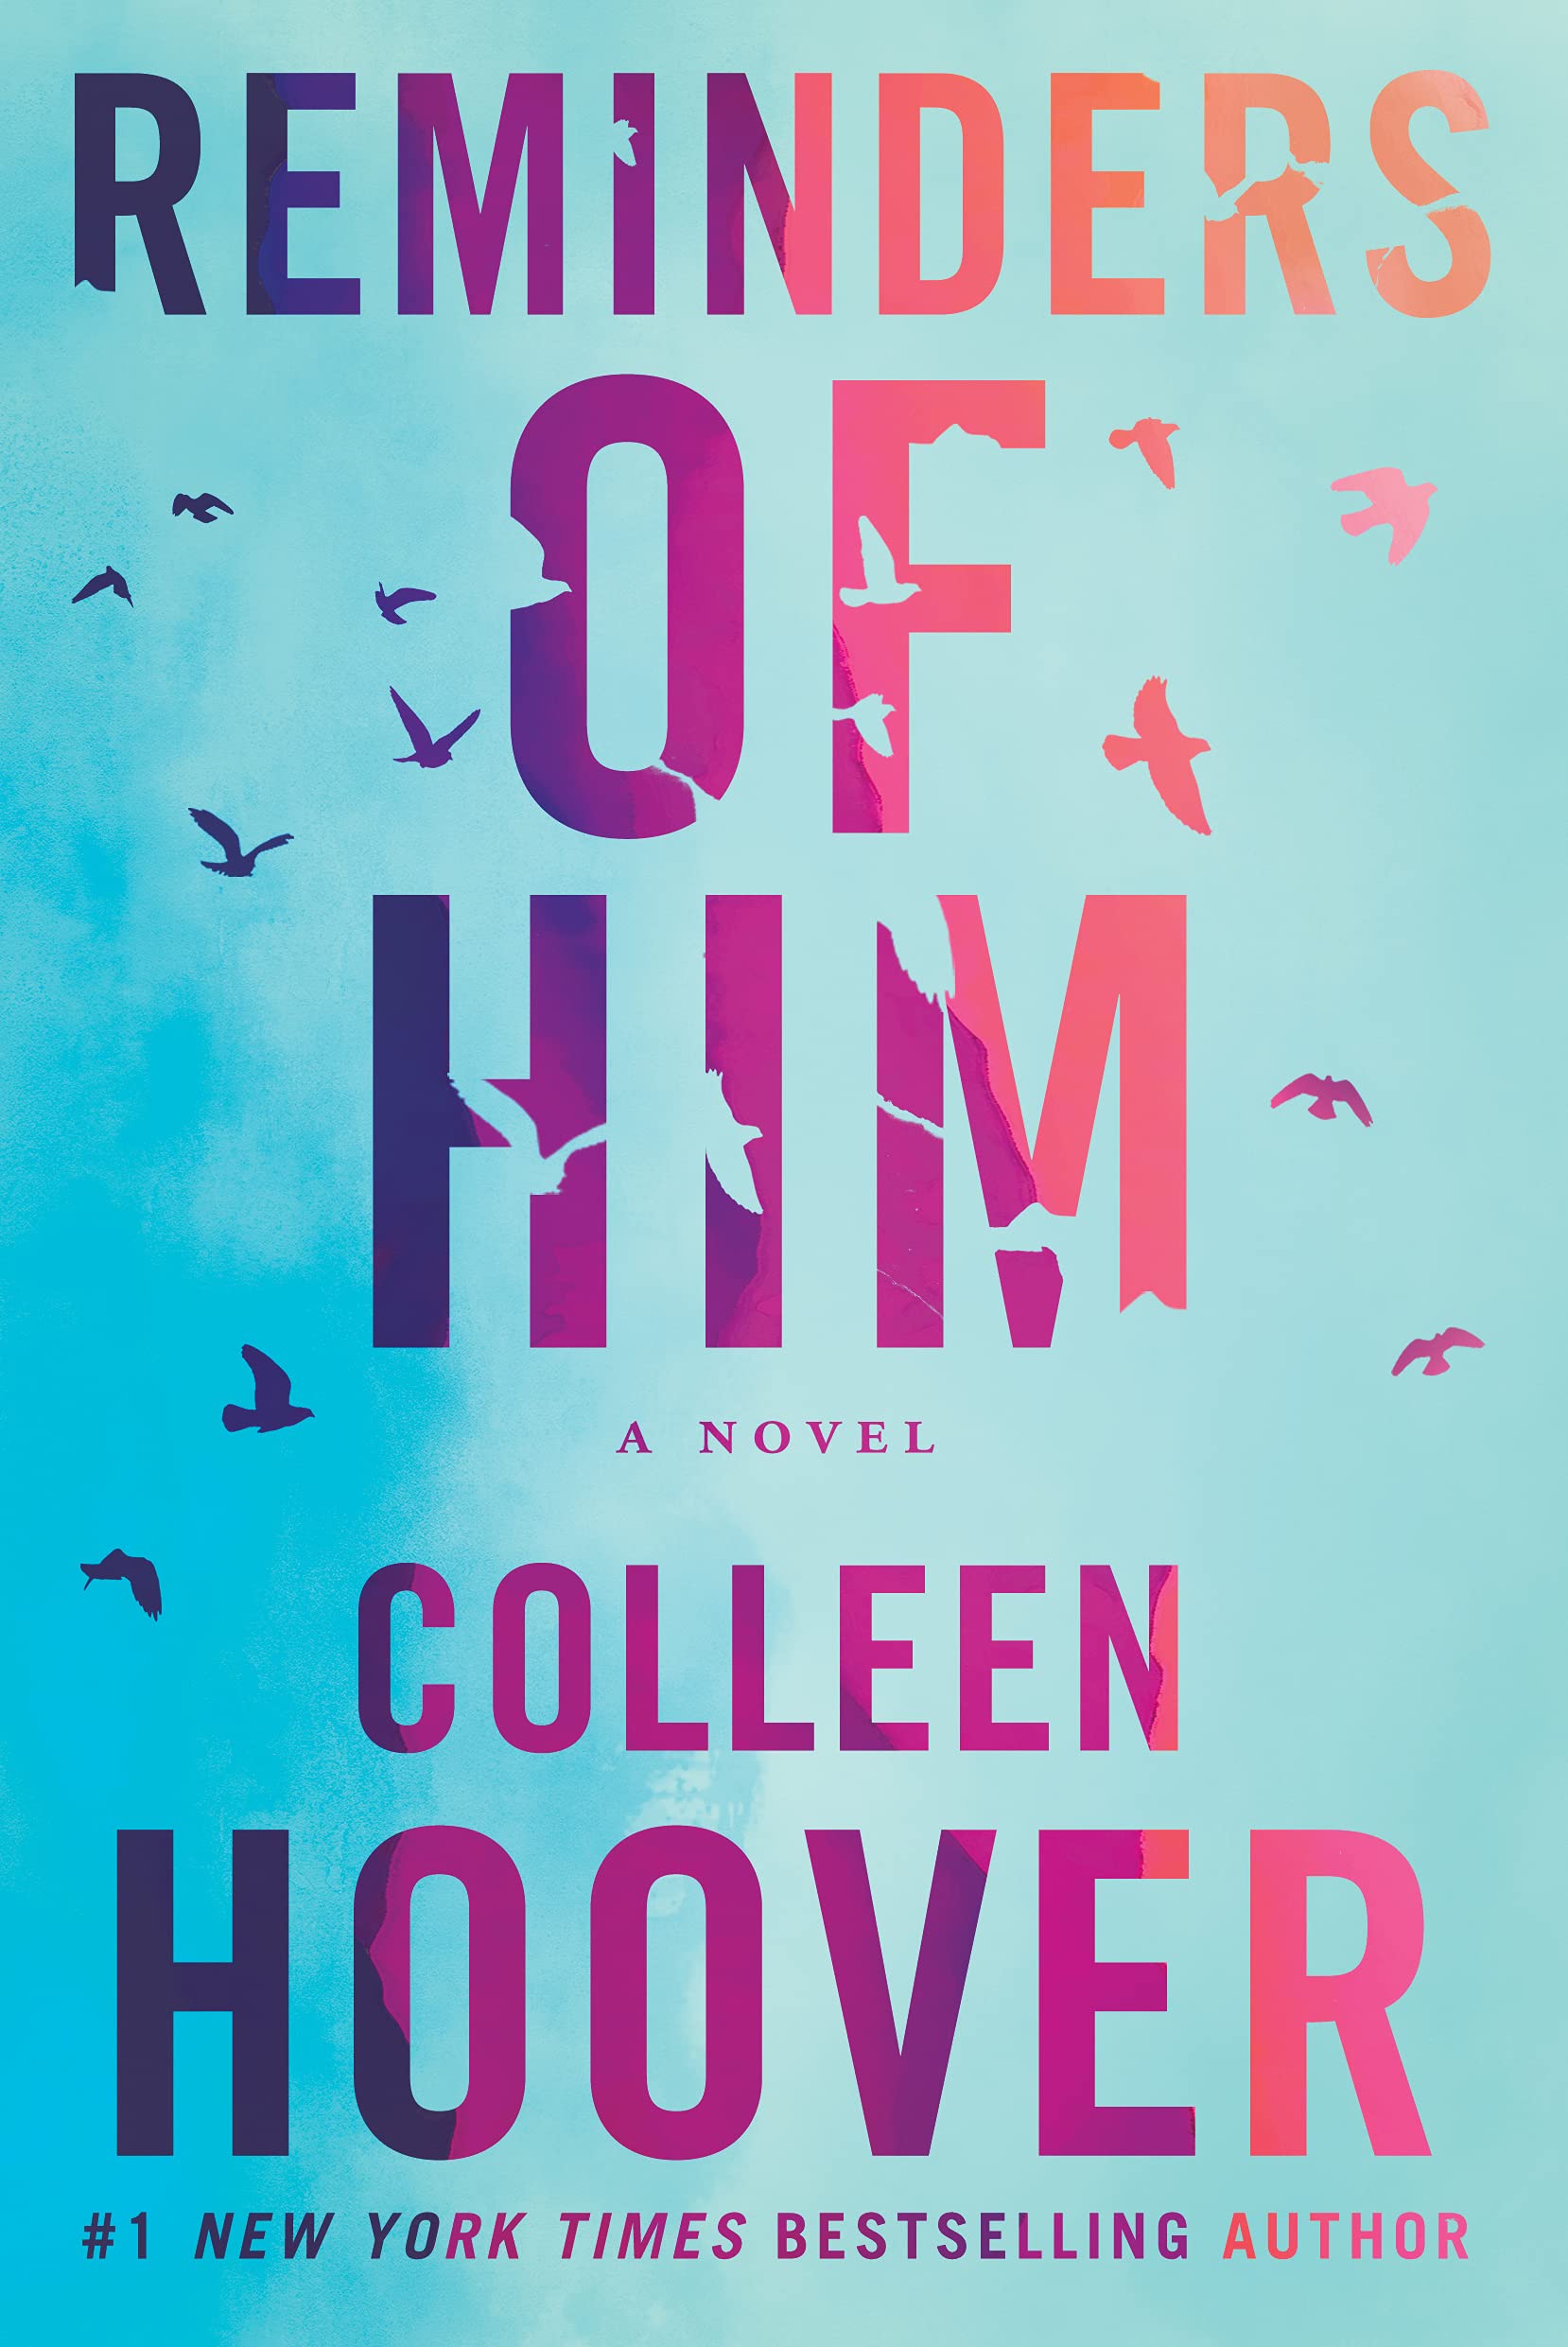 Book Review “reminder Of Him” By Colleen Hoover Voice Of Journalists